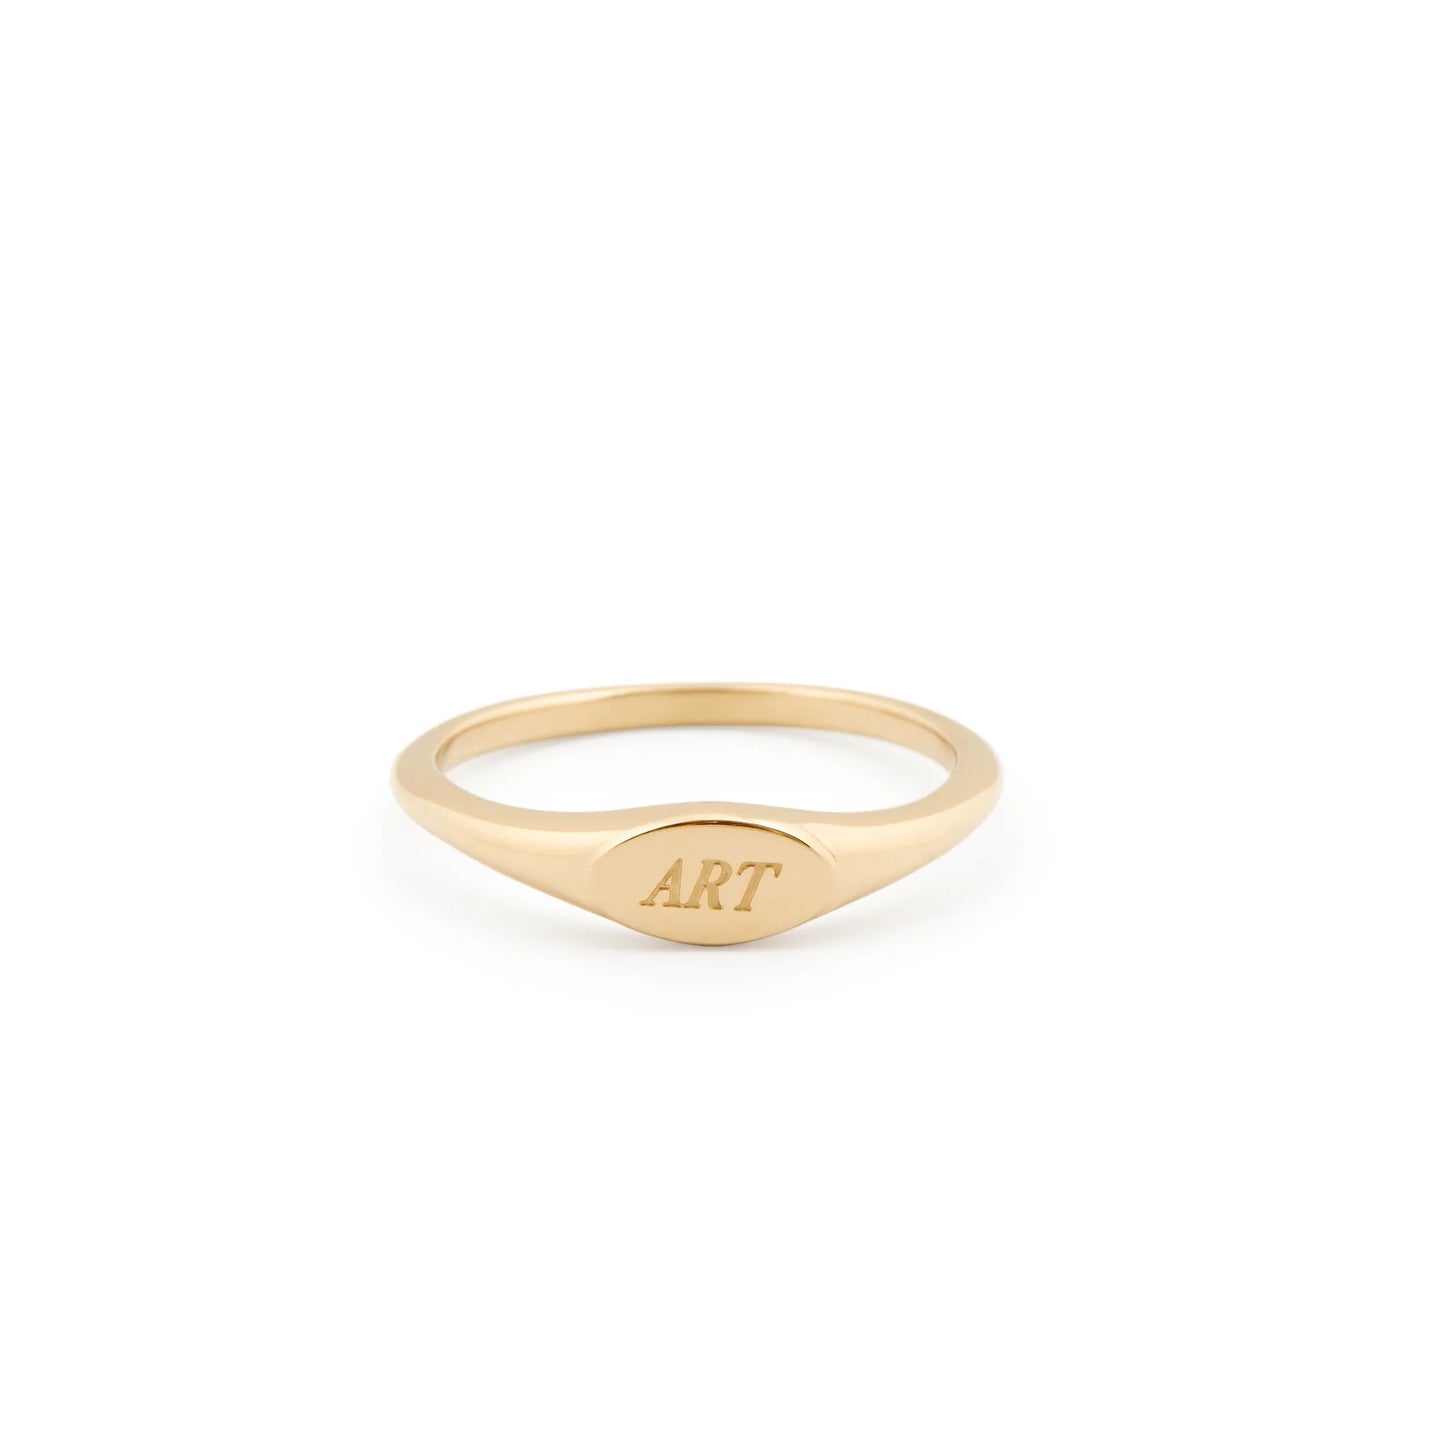 ART ring - gold plated